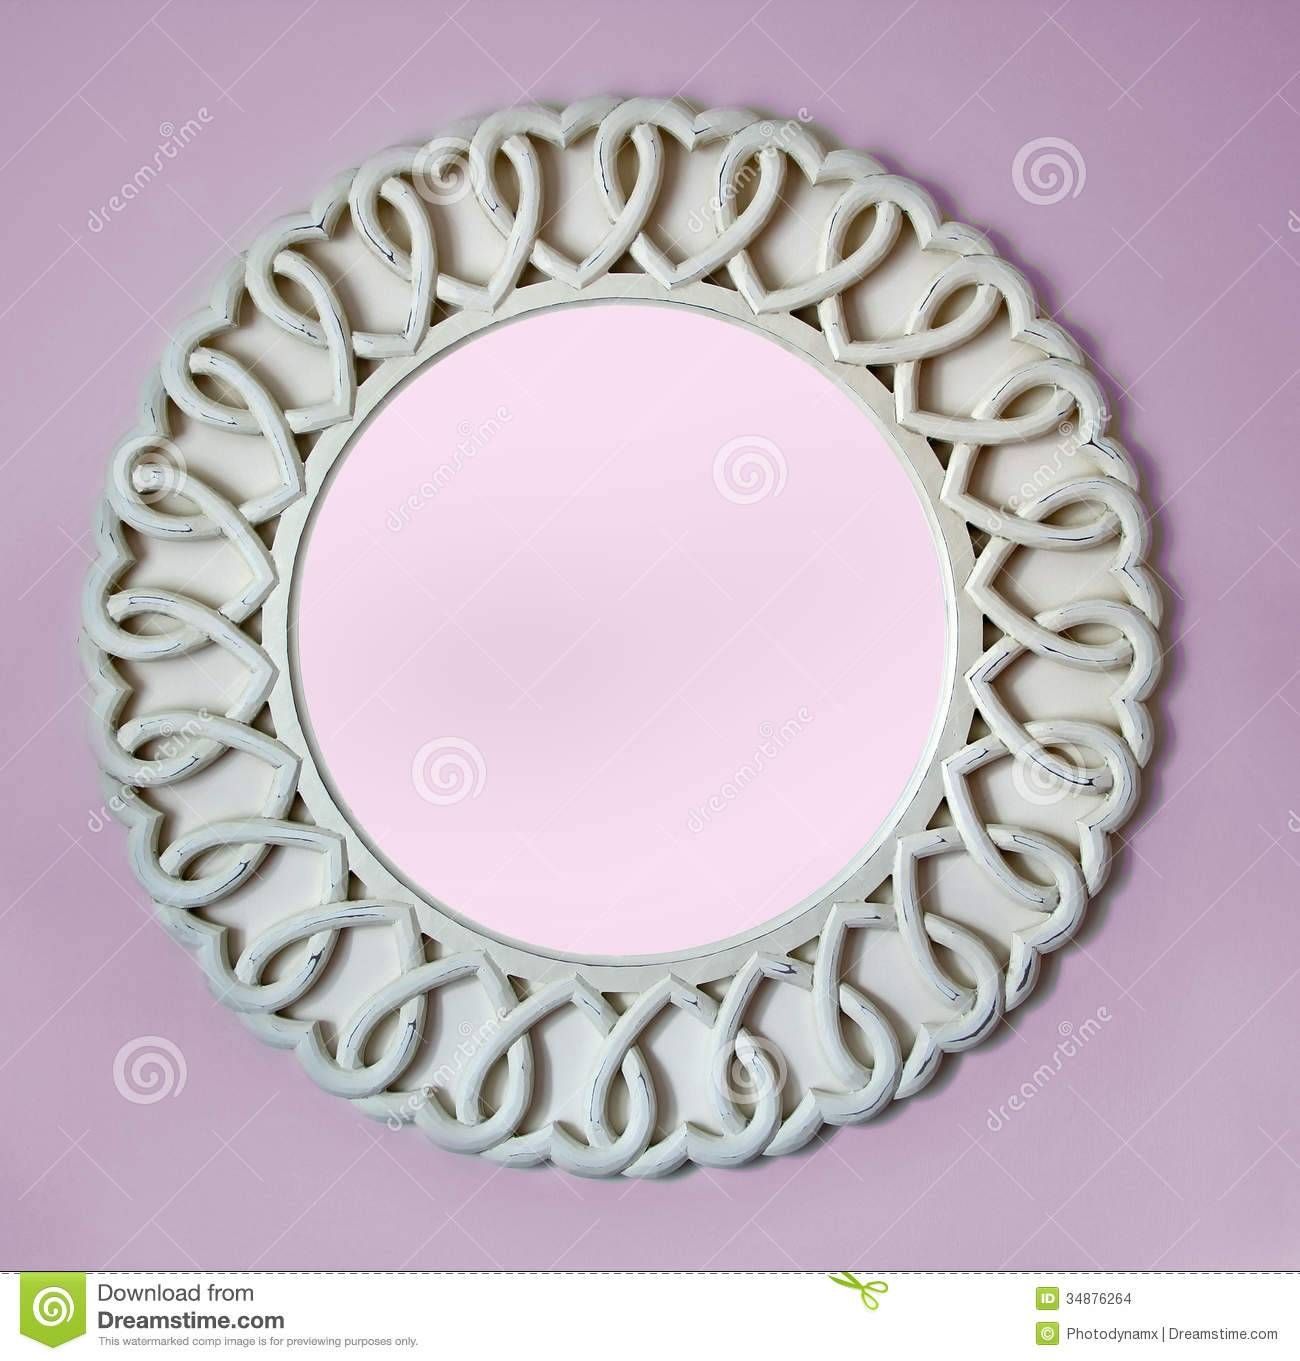 Rustic Loveheart Round Mirror Stock Images – Image: 34876264 Pertaining To Shabby Chic Round Mirrors (View 1 of 25)